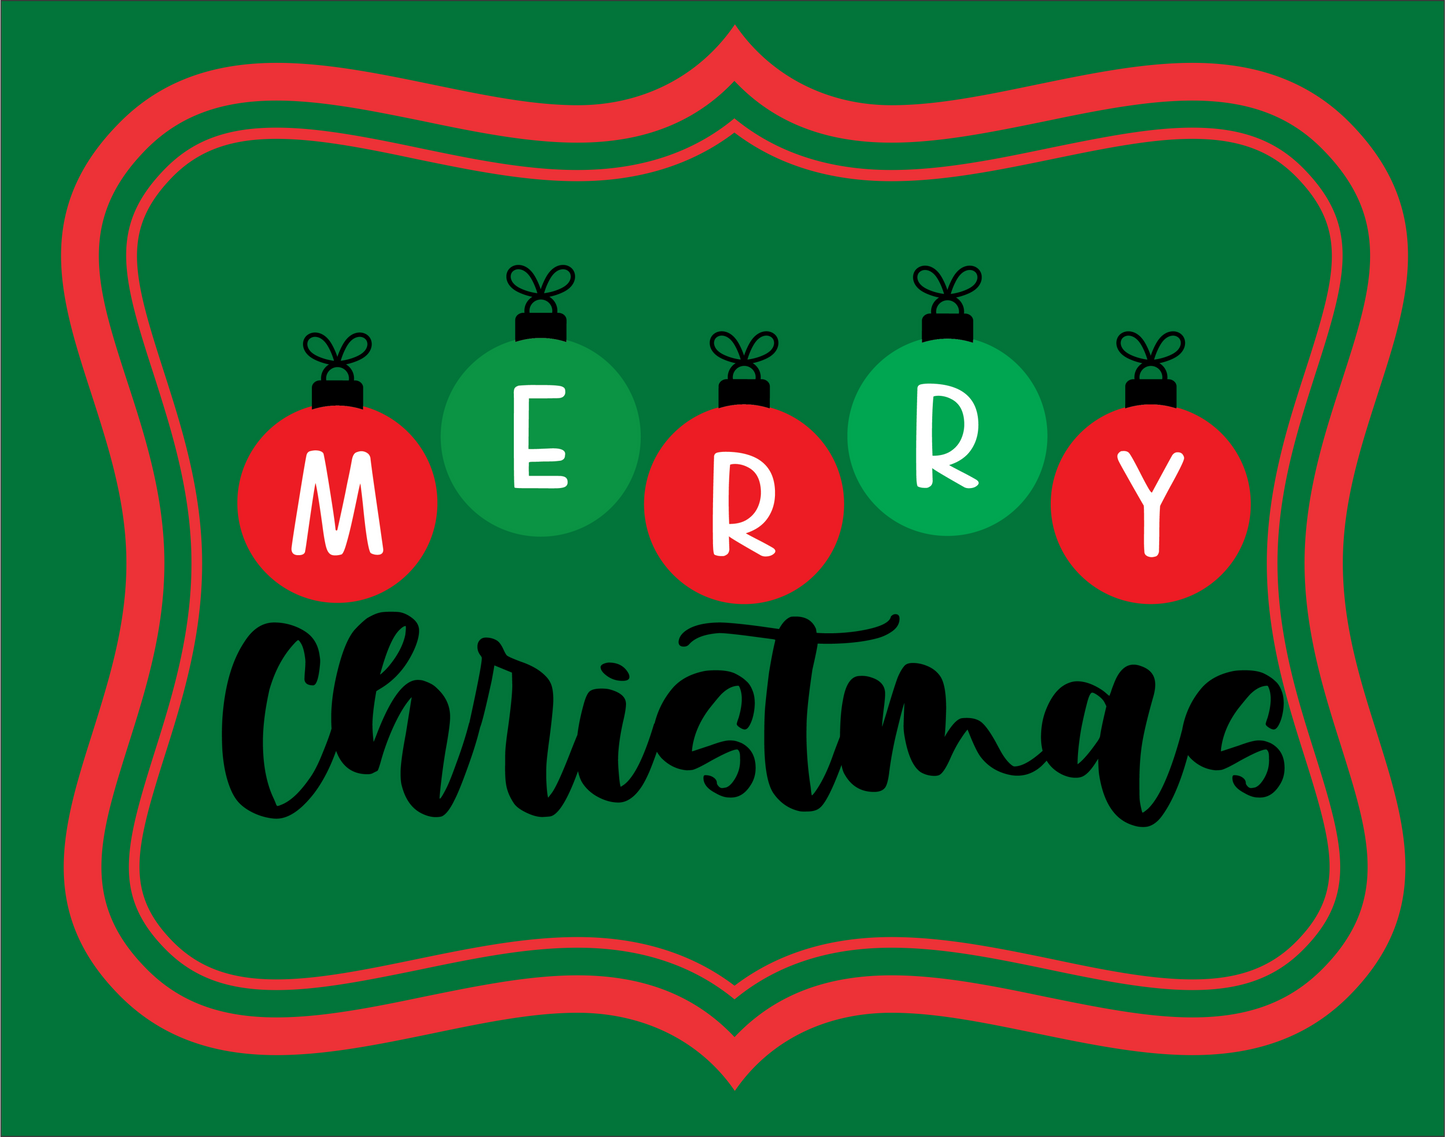 Merry Christmas in red and green Ornaments sign